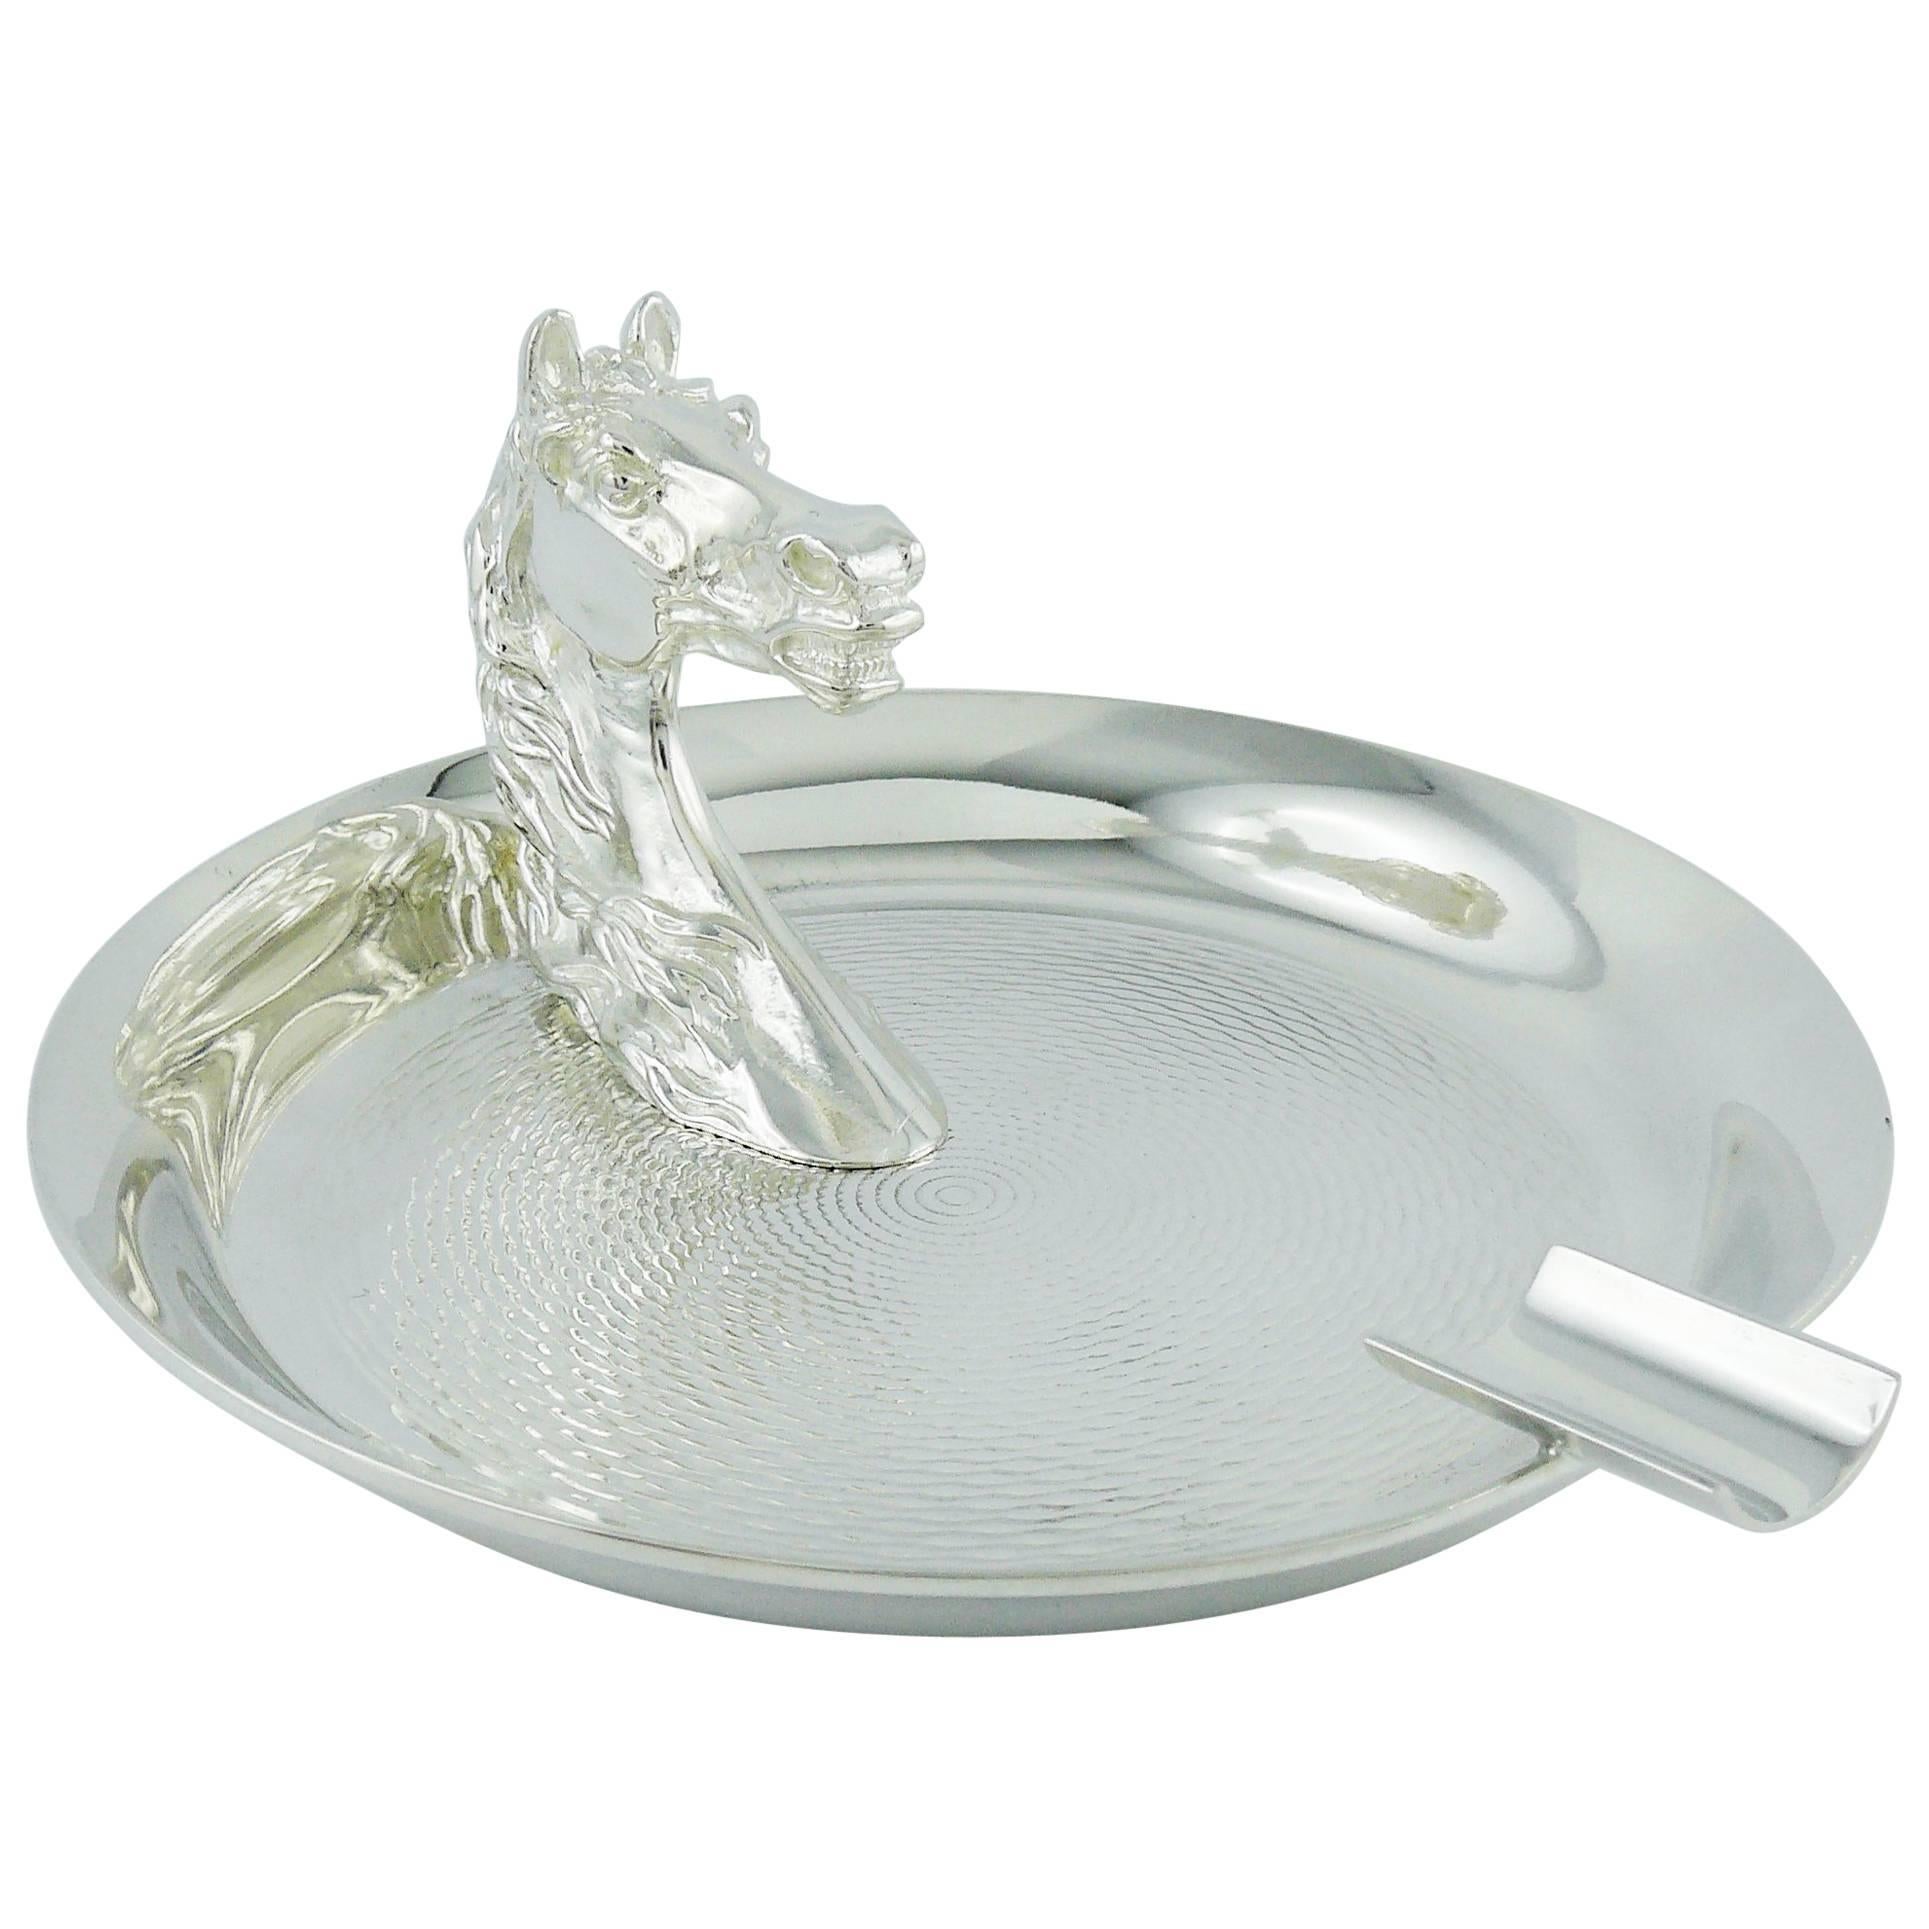 Hermes Vintage Silver Plated Horse Head Equestrian Ashtray